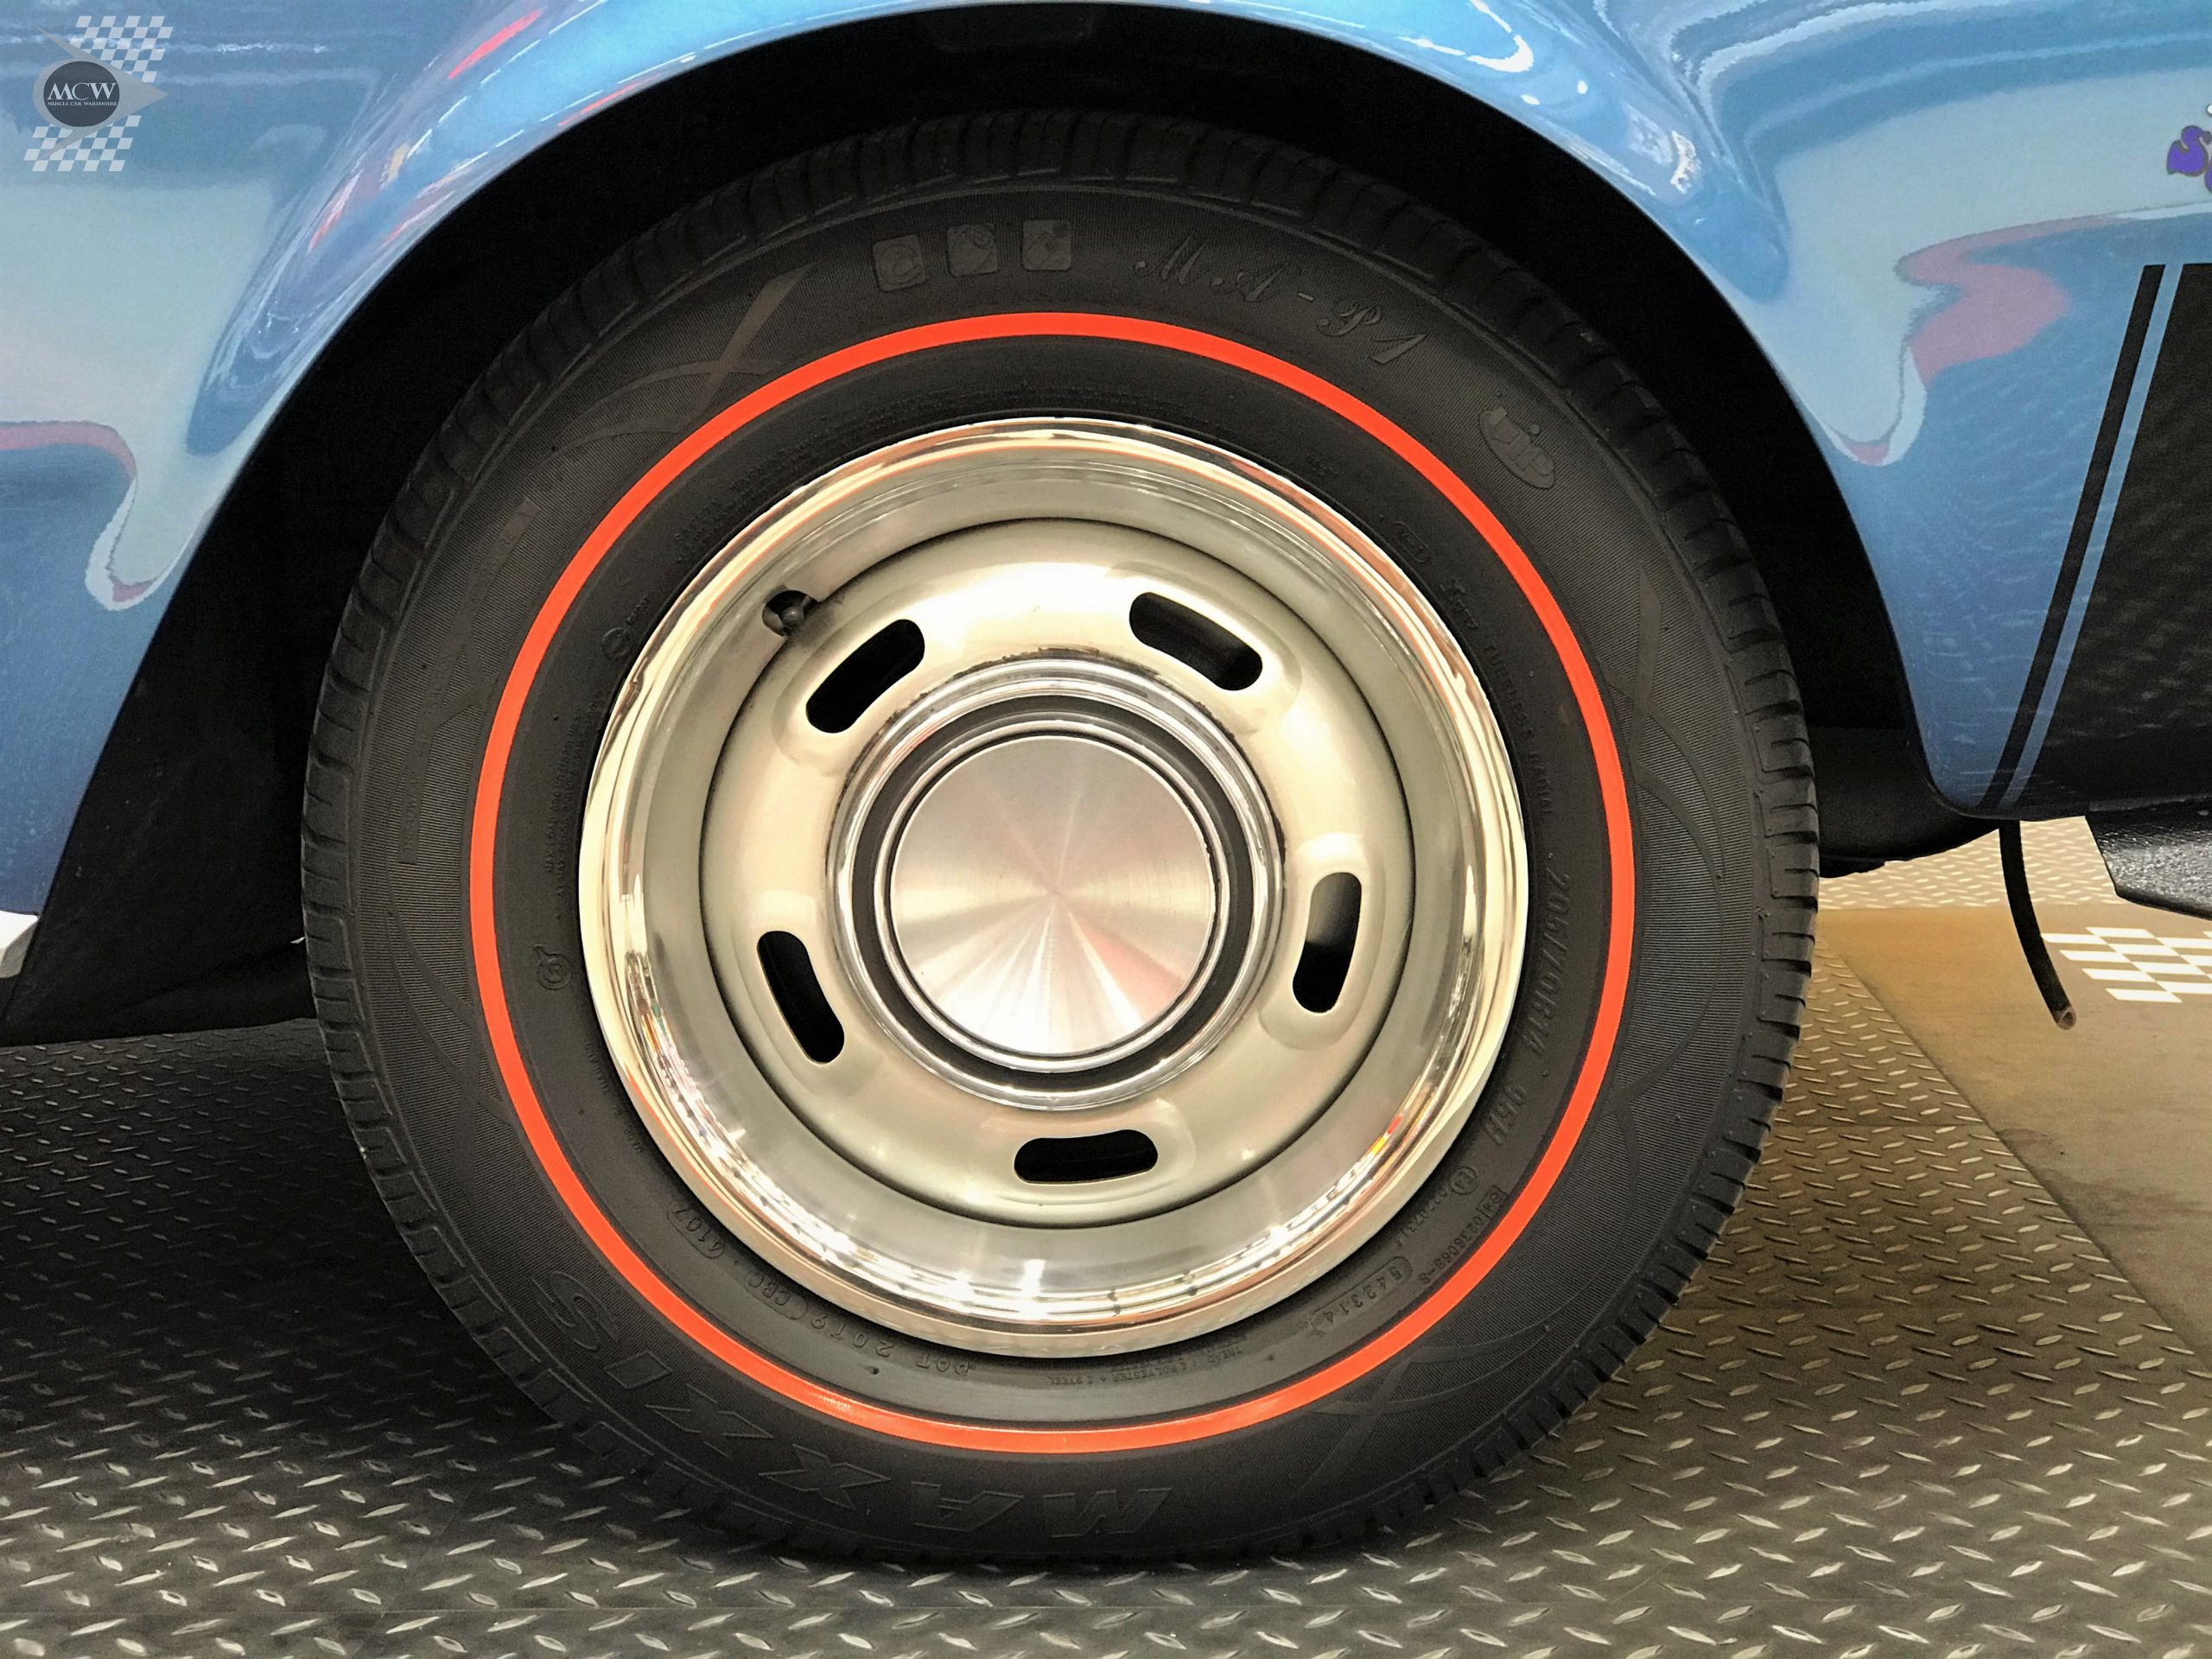 1970 Ford Falcon XW GT Wheel - Muscle Car Warehouse